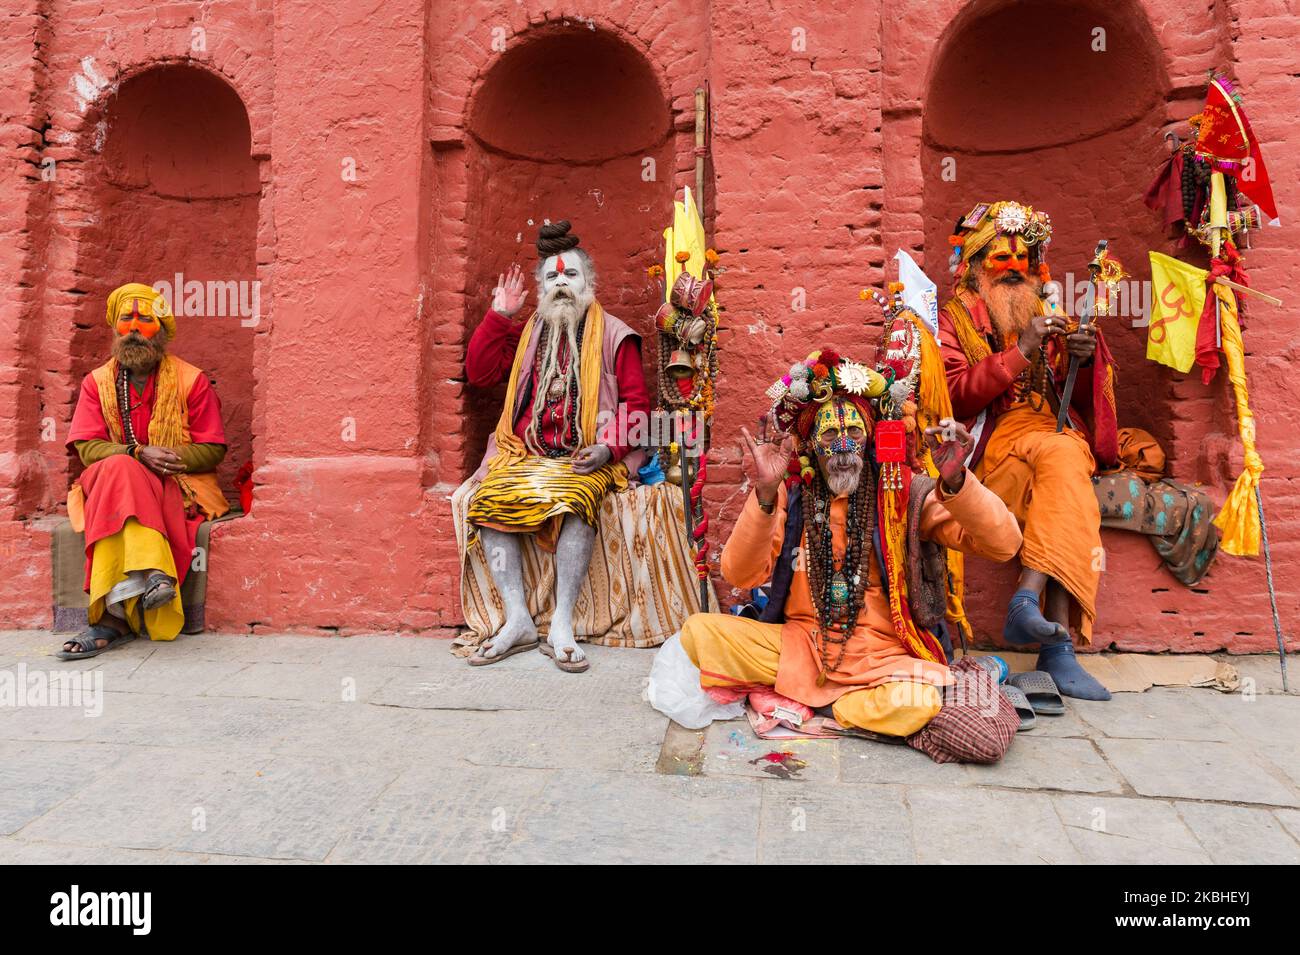 Hindu holy men (sadhus) with painted faces and dressed in colouful clothing and elaborate headpieces gather at the Pashupatinath temple complex, one of the holiest shrines of the Hindus as well as UNESCO Heritage Site, on the day of Maha Shivaratri Festival on 21 February, 2020 in Kathmandu, Nepal. Hundreds of thousands of devotees from across Nepal and India are expected to visit the Pashupatinath Temple to celebrate Maha Shivaratri by offering special prayers and fasting to worship Lord Shiva. (Photo by WIktor Szymanowicz/NurPhoto) Stock Photo